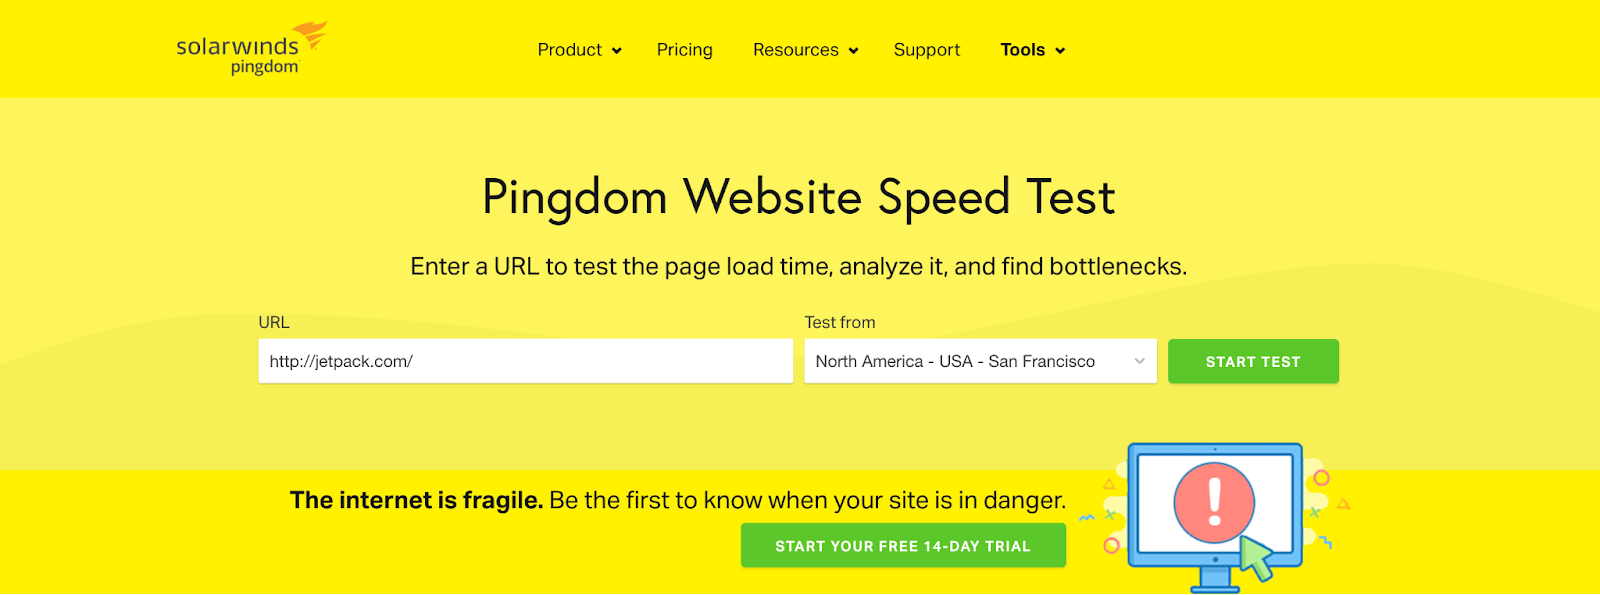 Tips on how to test web page load speed with Gtmetrix